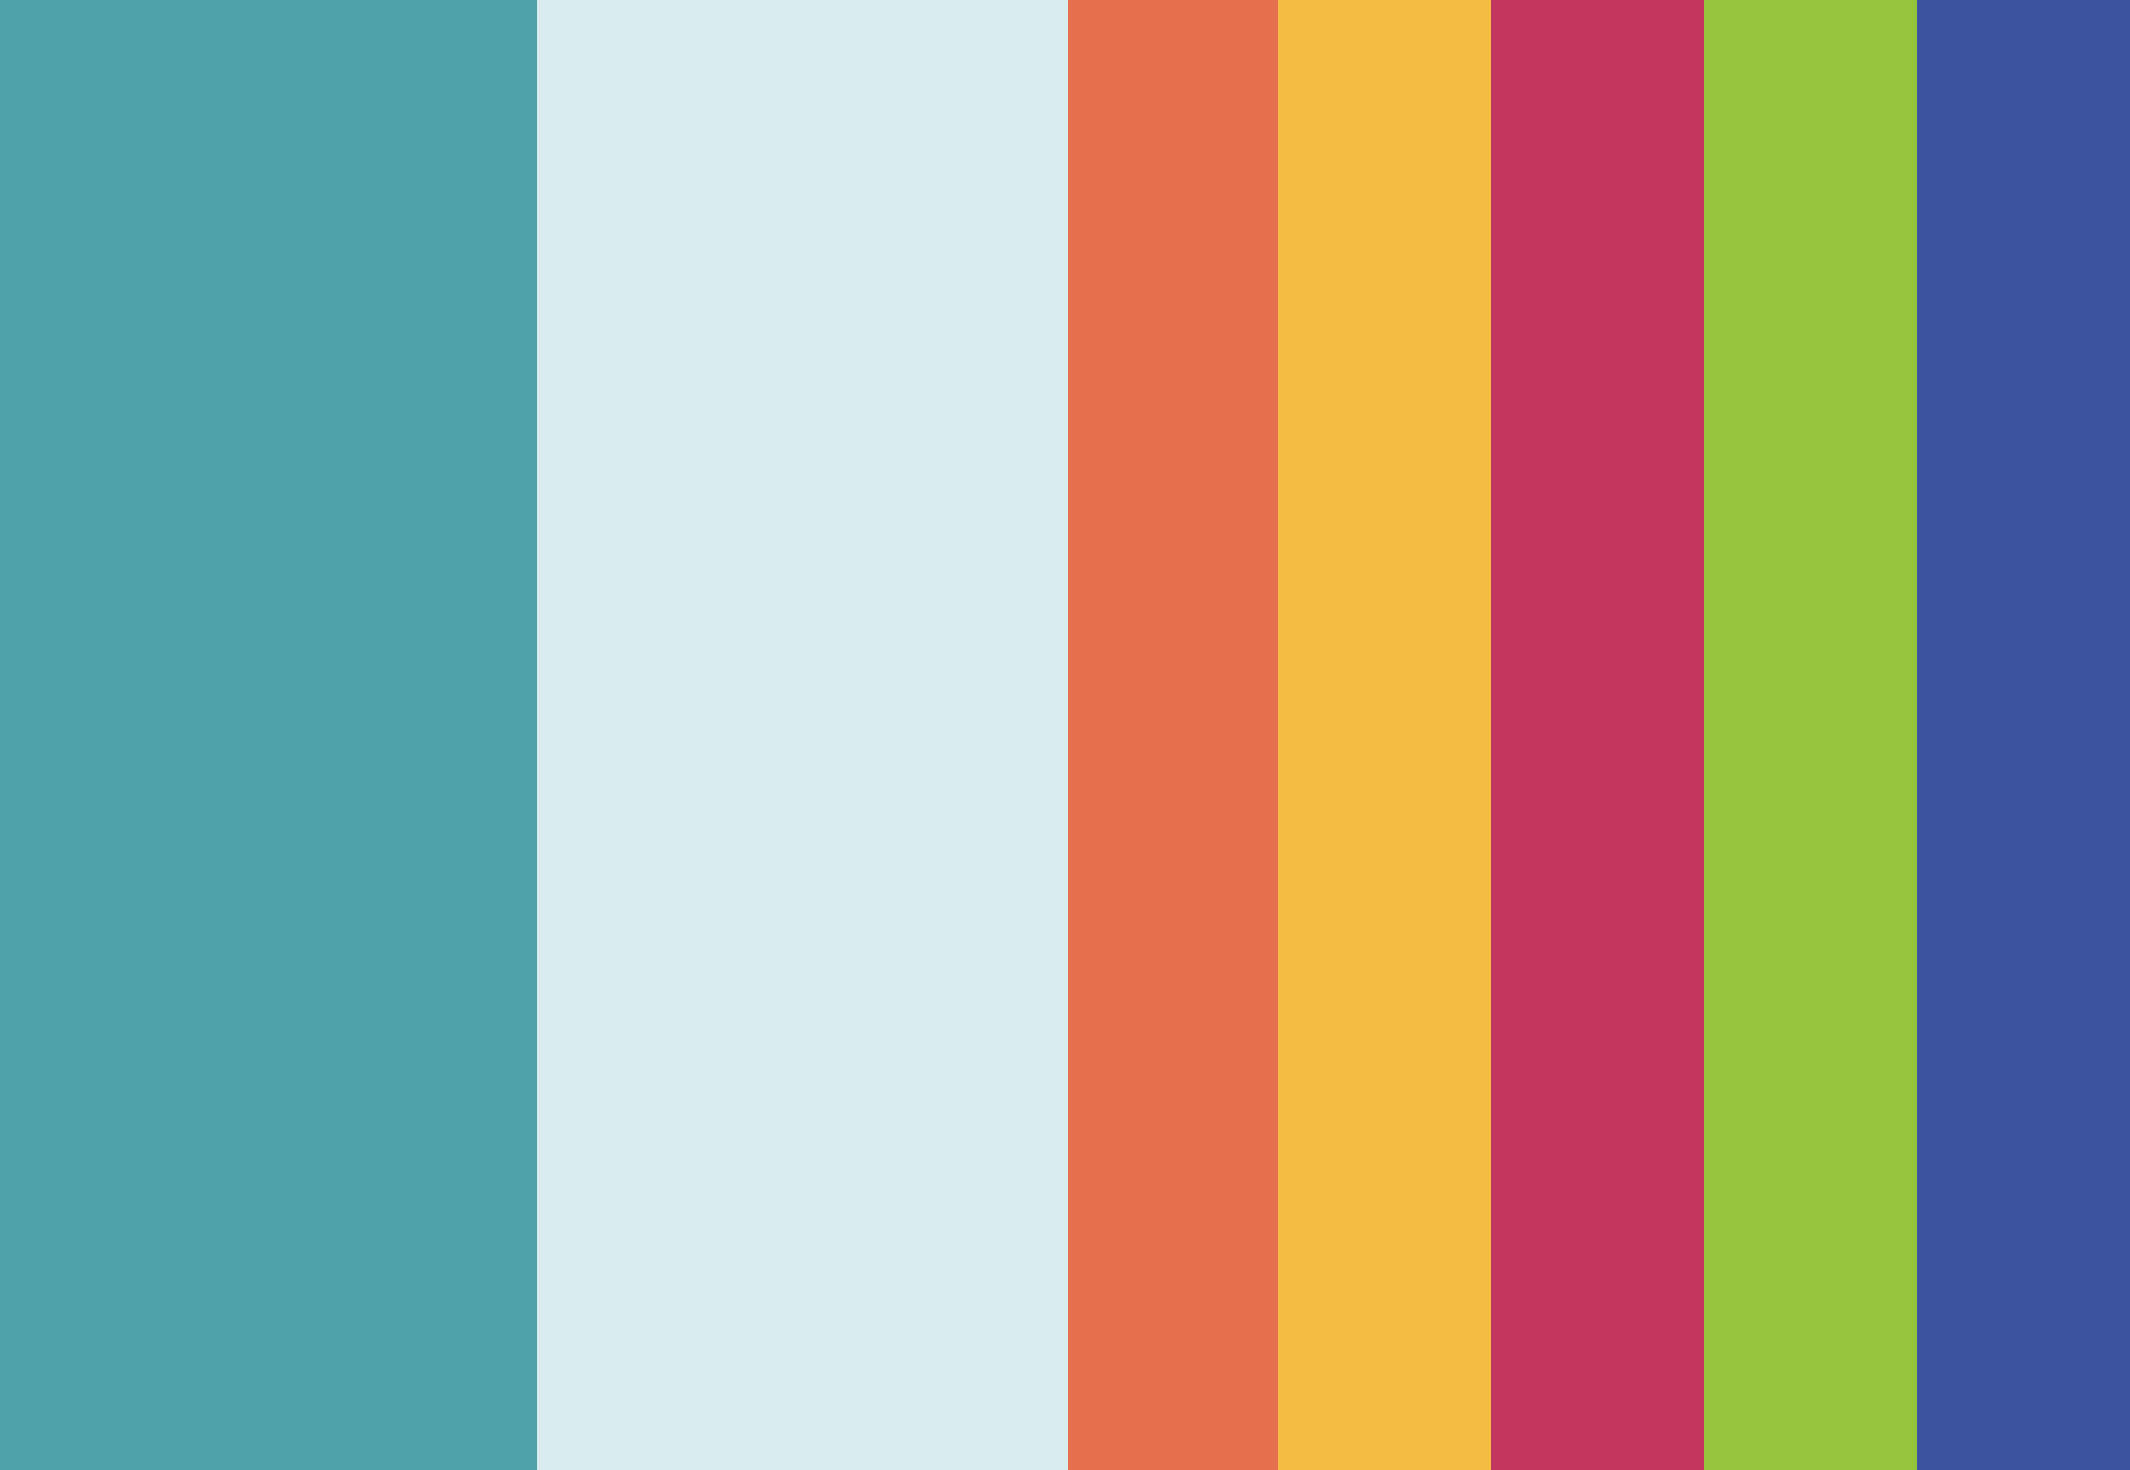 Colour palette for Winterberry brand: Teal, light teal, orange, yellow, cherry, lime, blue.